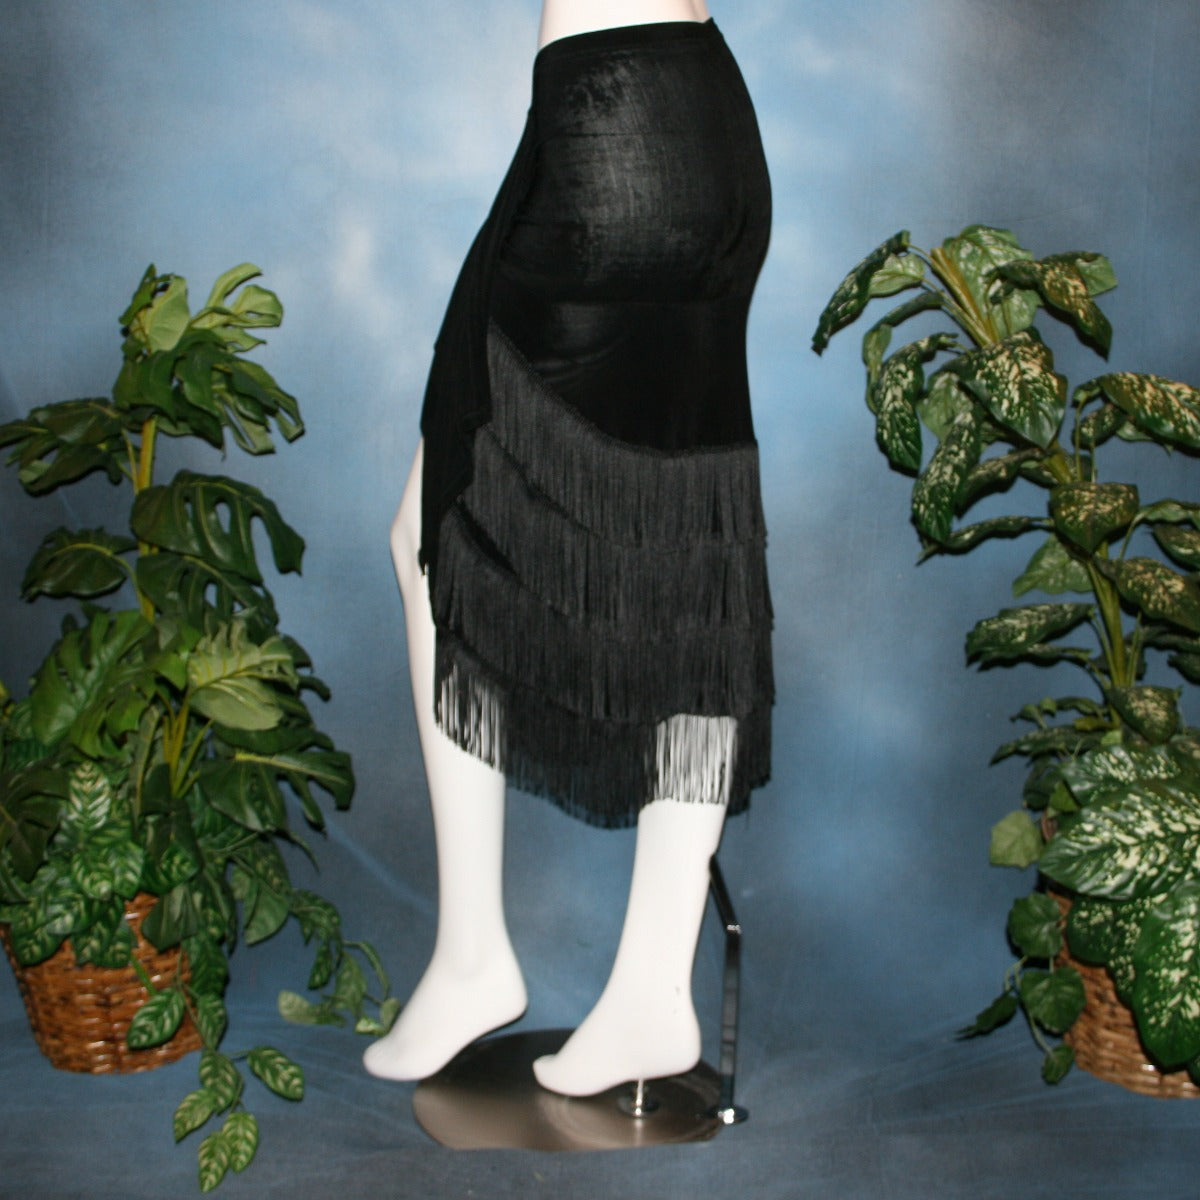 Crystal's Creations back view of Black fringy hip wrap Latin/rhythm skirt, was created of luxurious black solid slinky, with 4 rows of black chainette fringe.